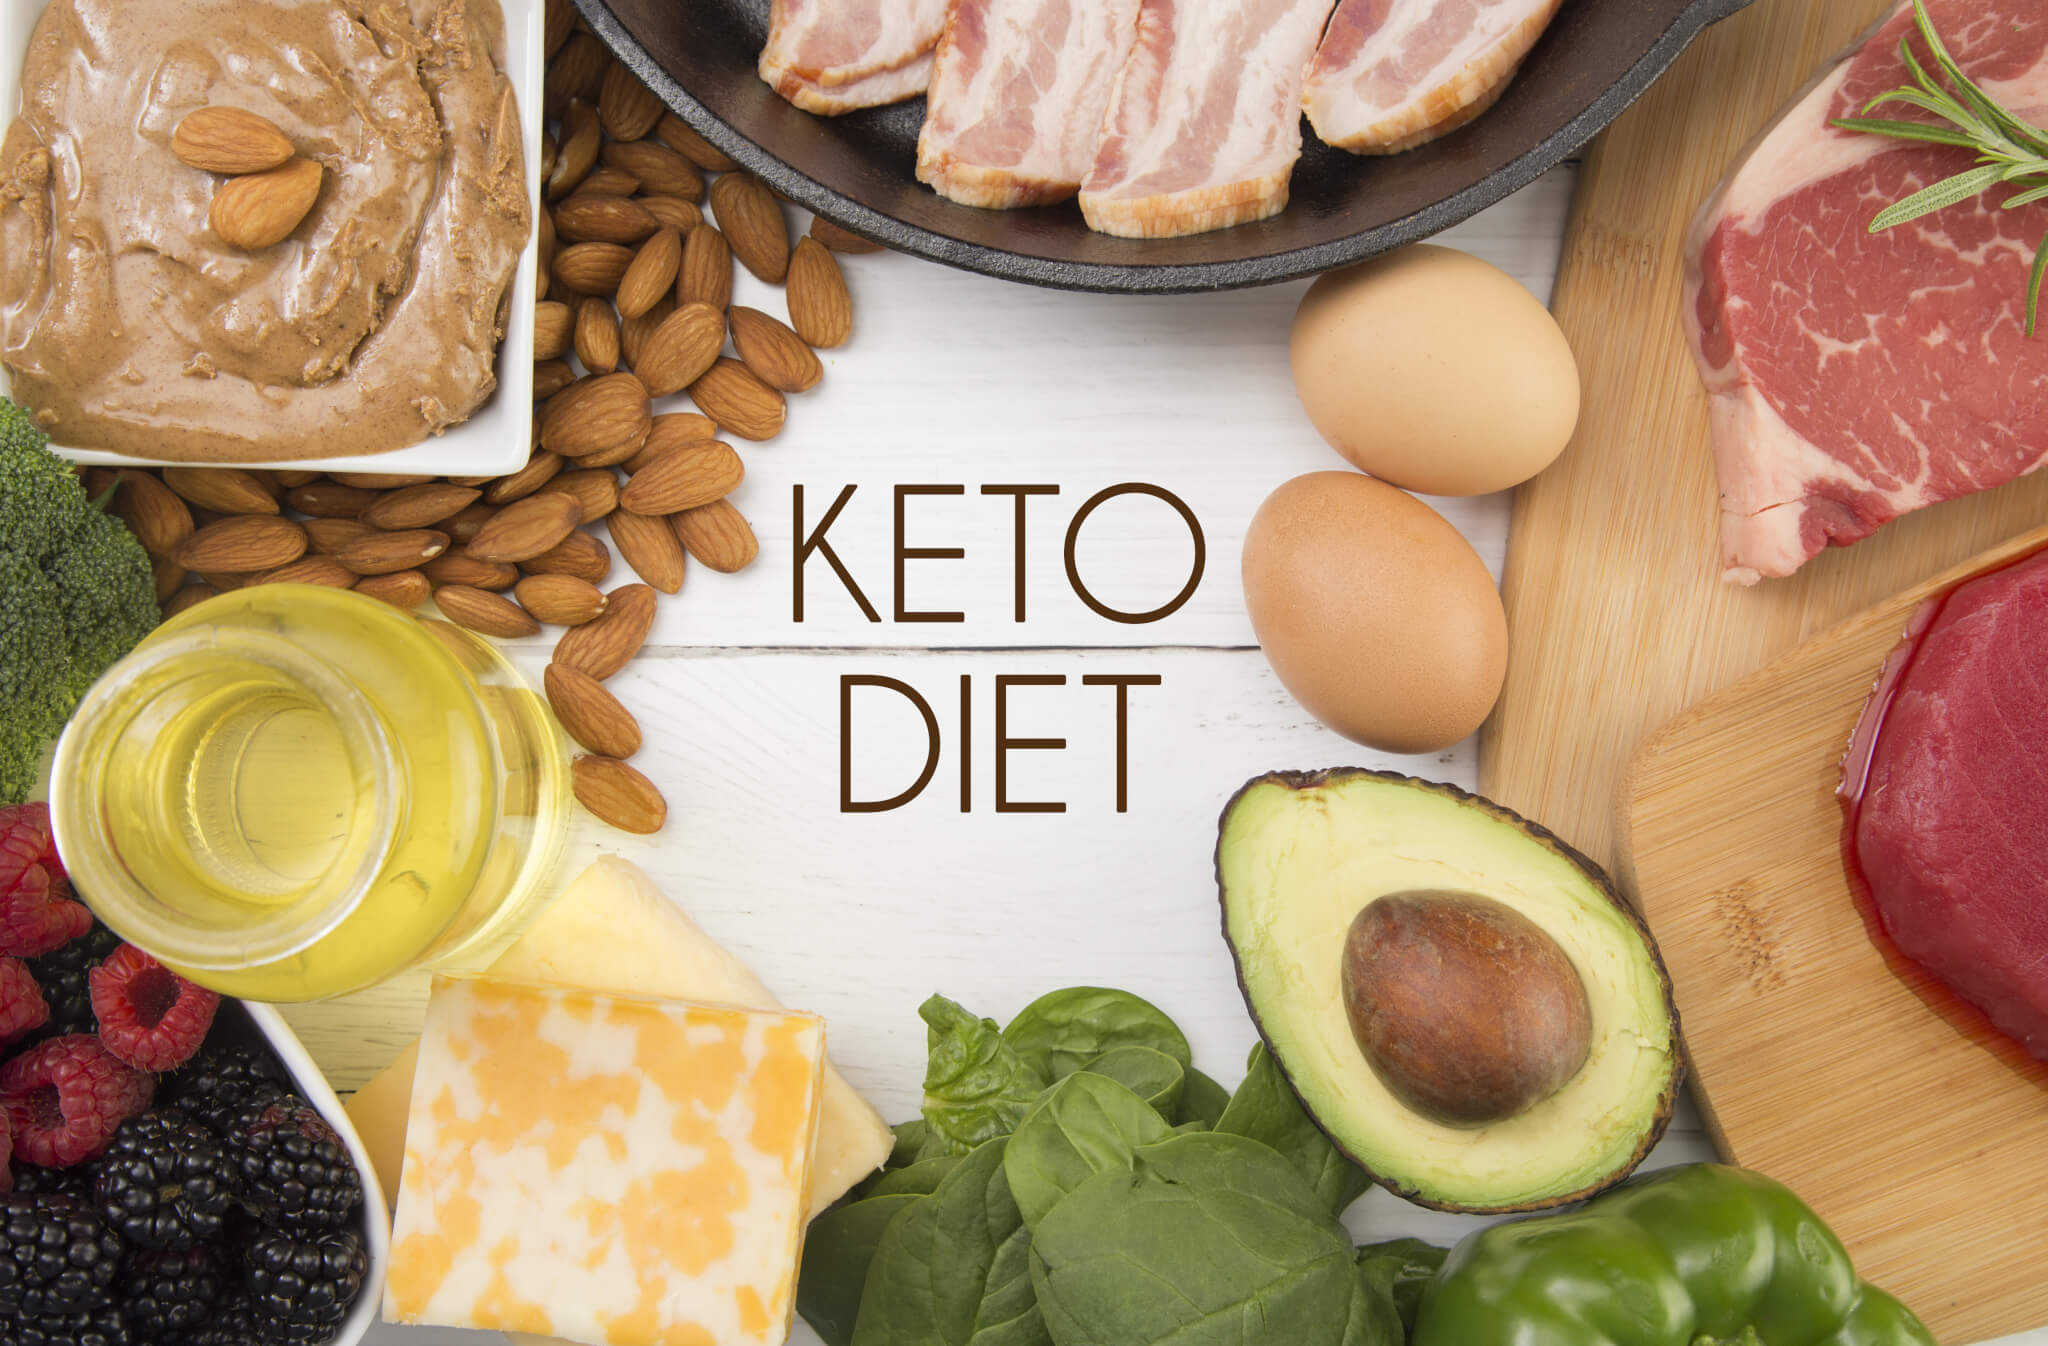 ketogenic diet mucas and colds